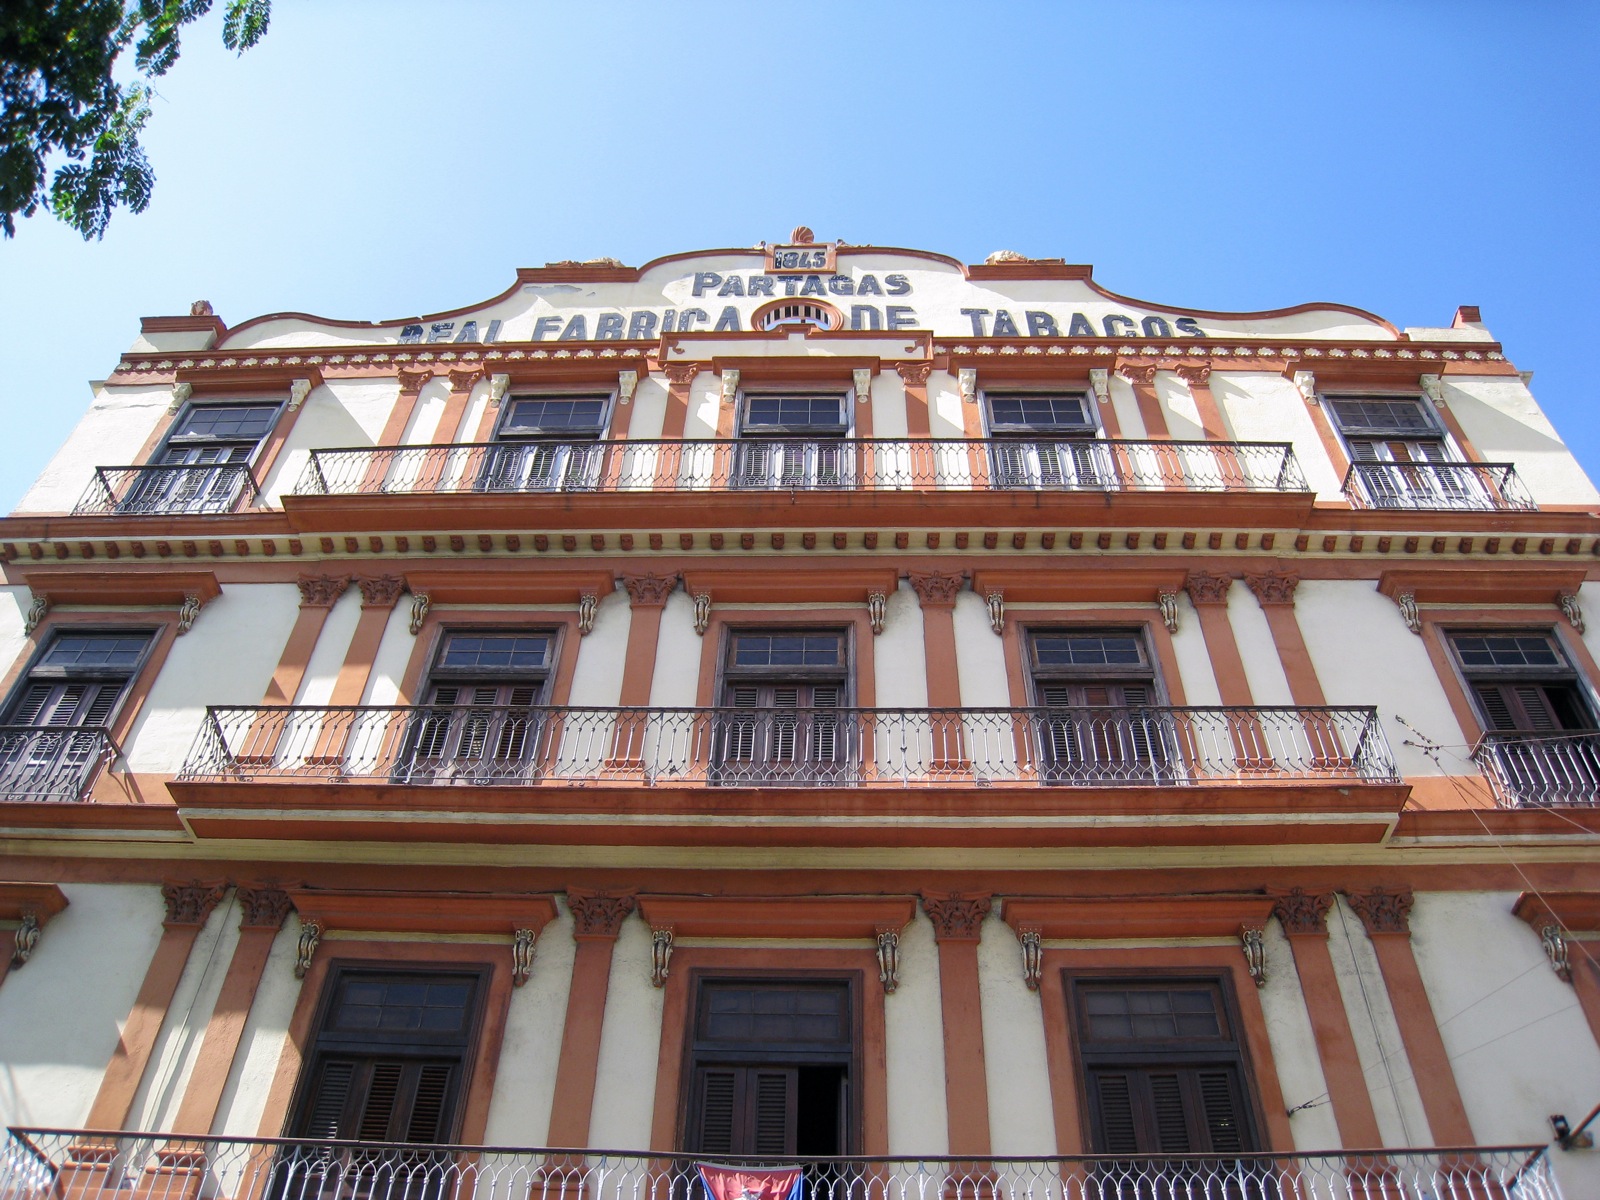 the front of the building has balconies and balcony railings